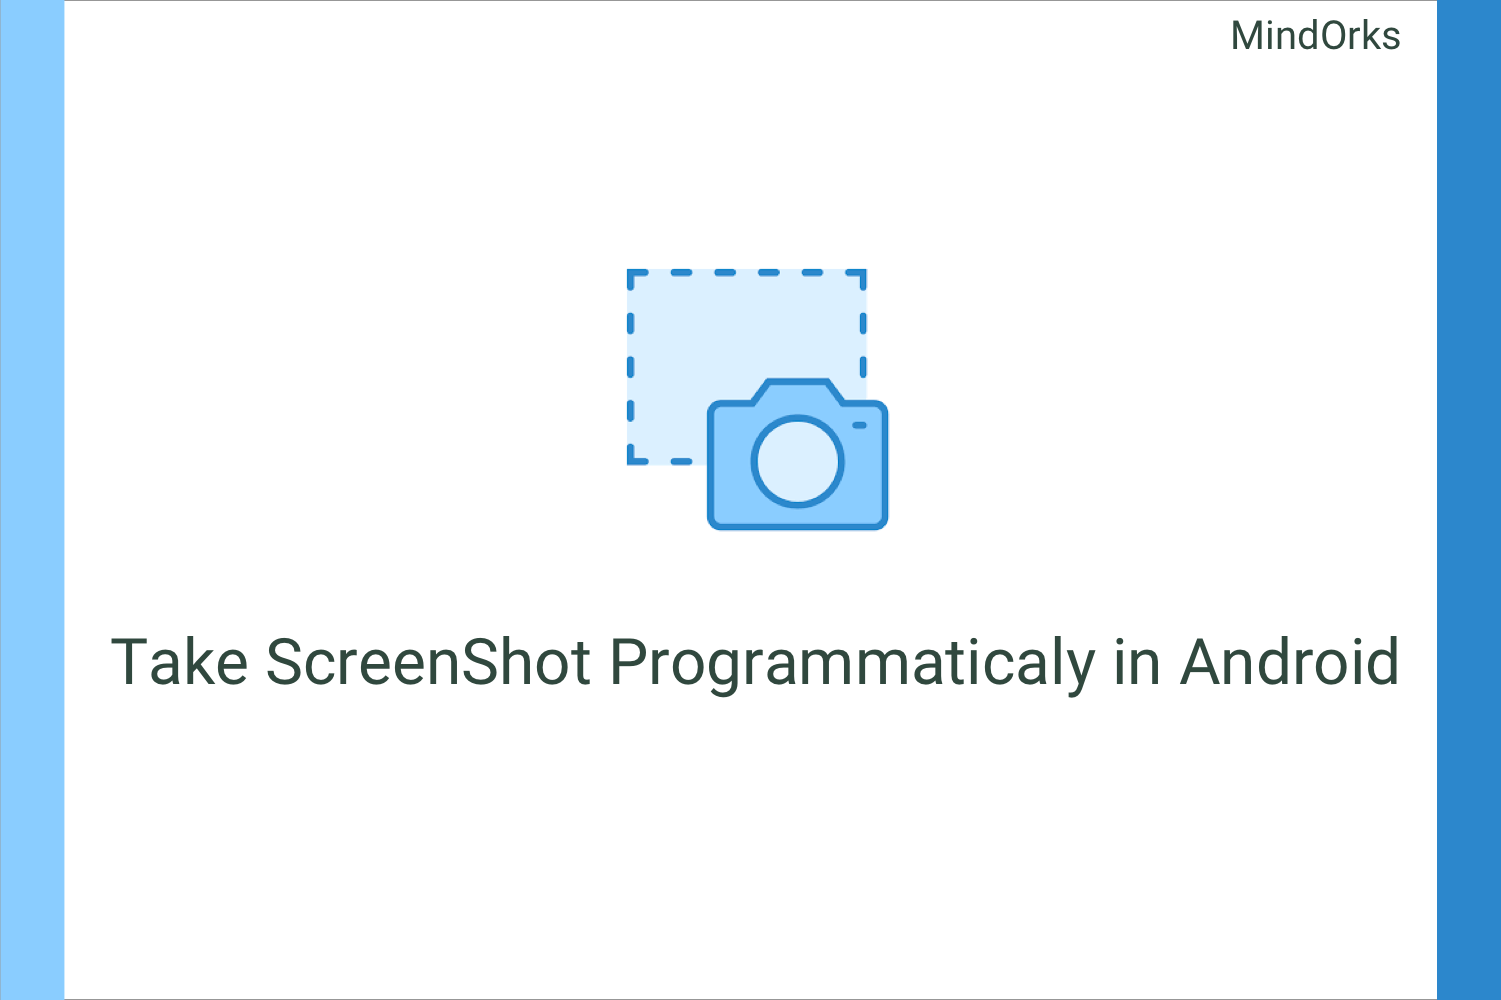 How to programmatically take a screenshot on Android?